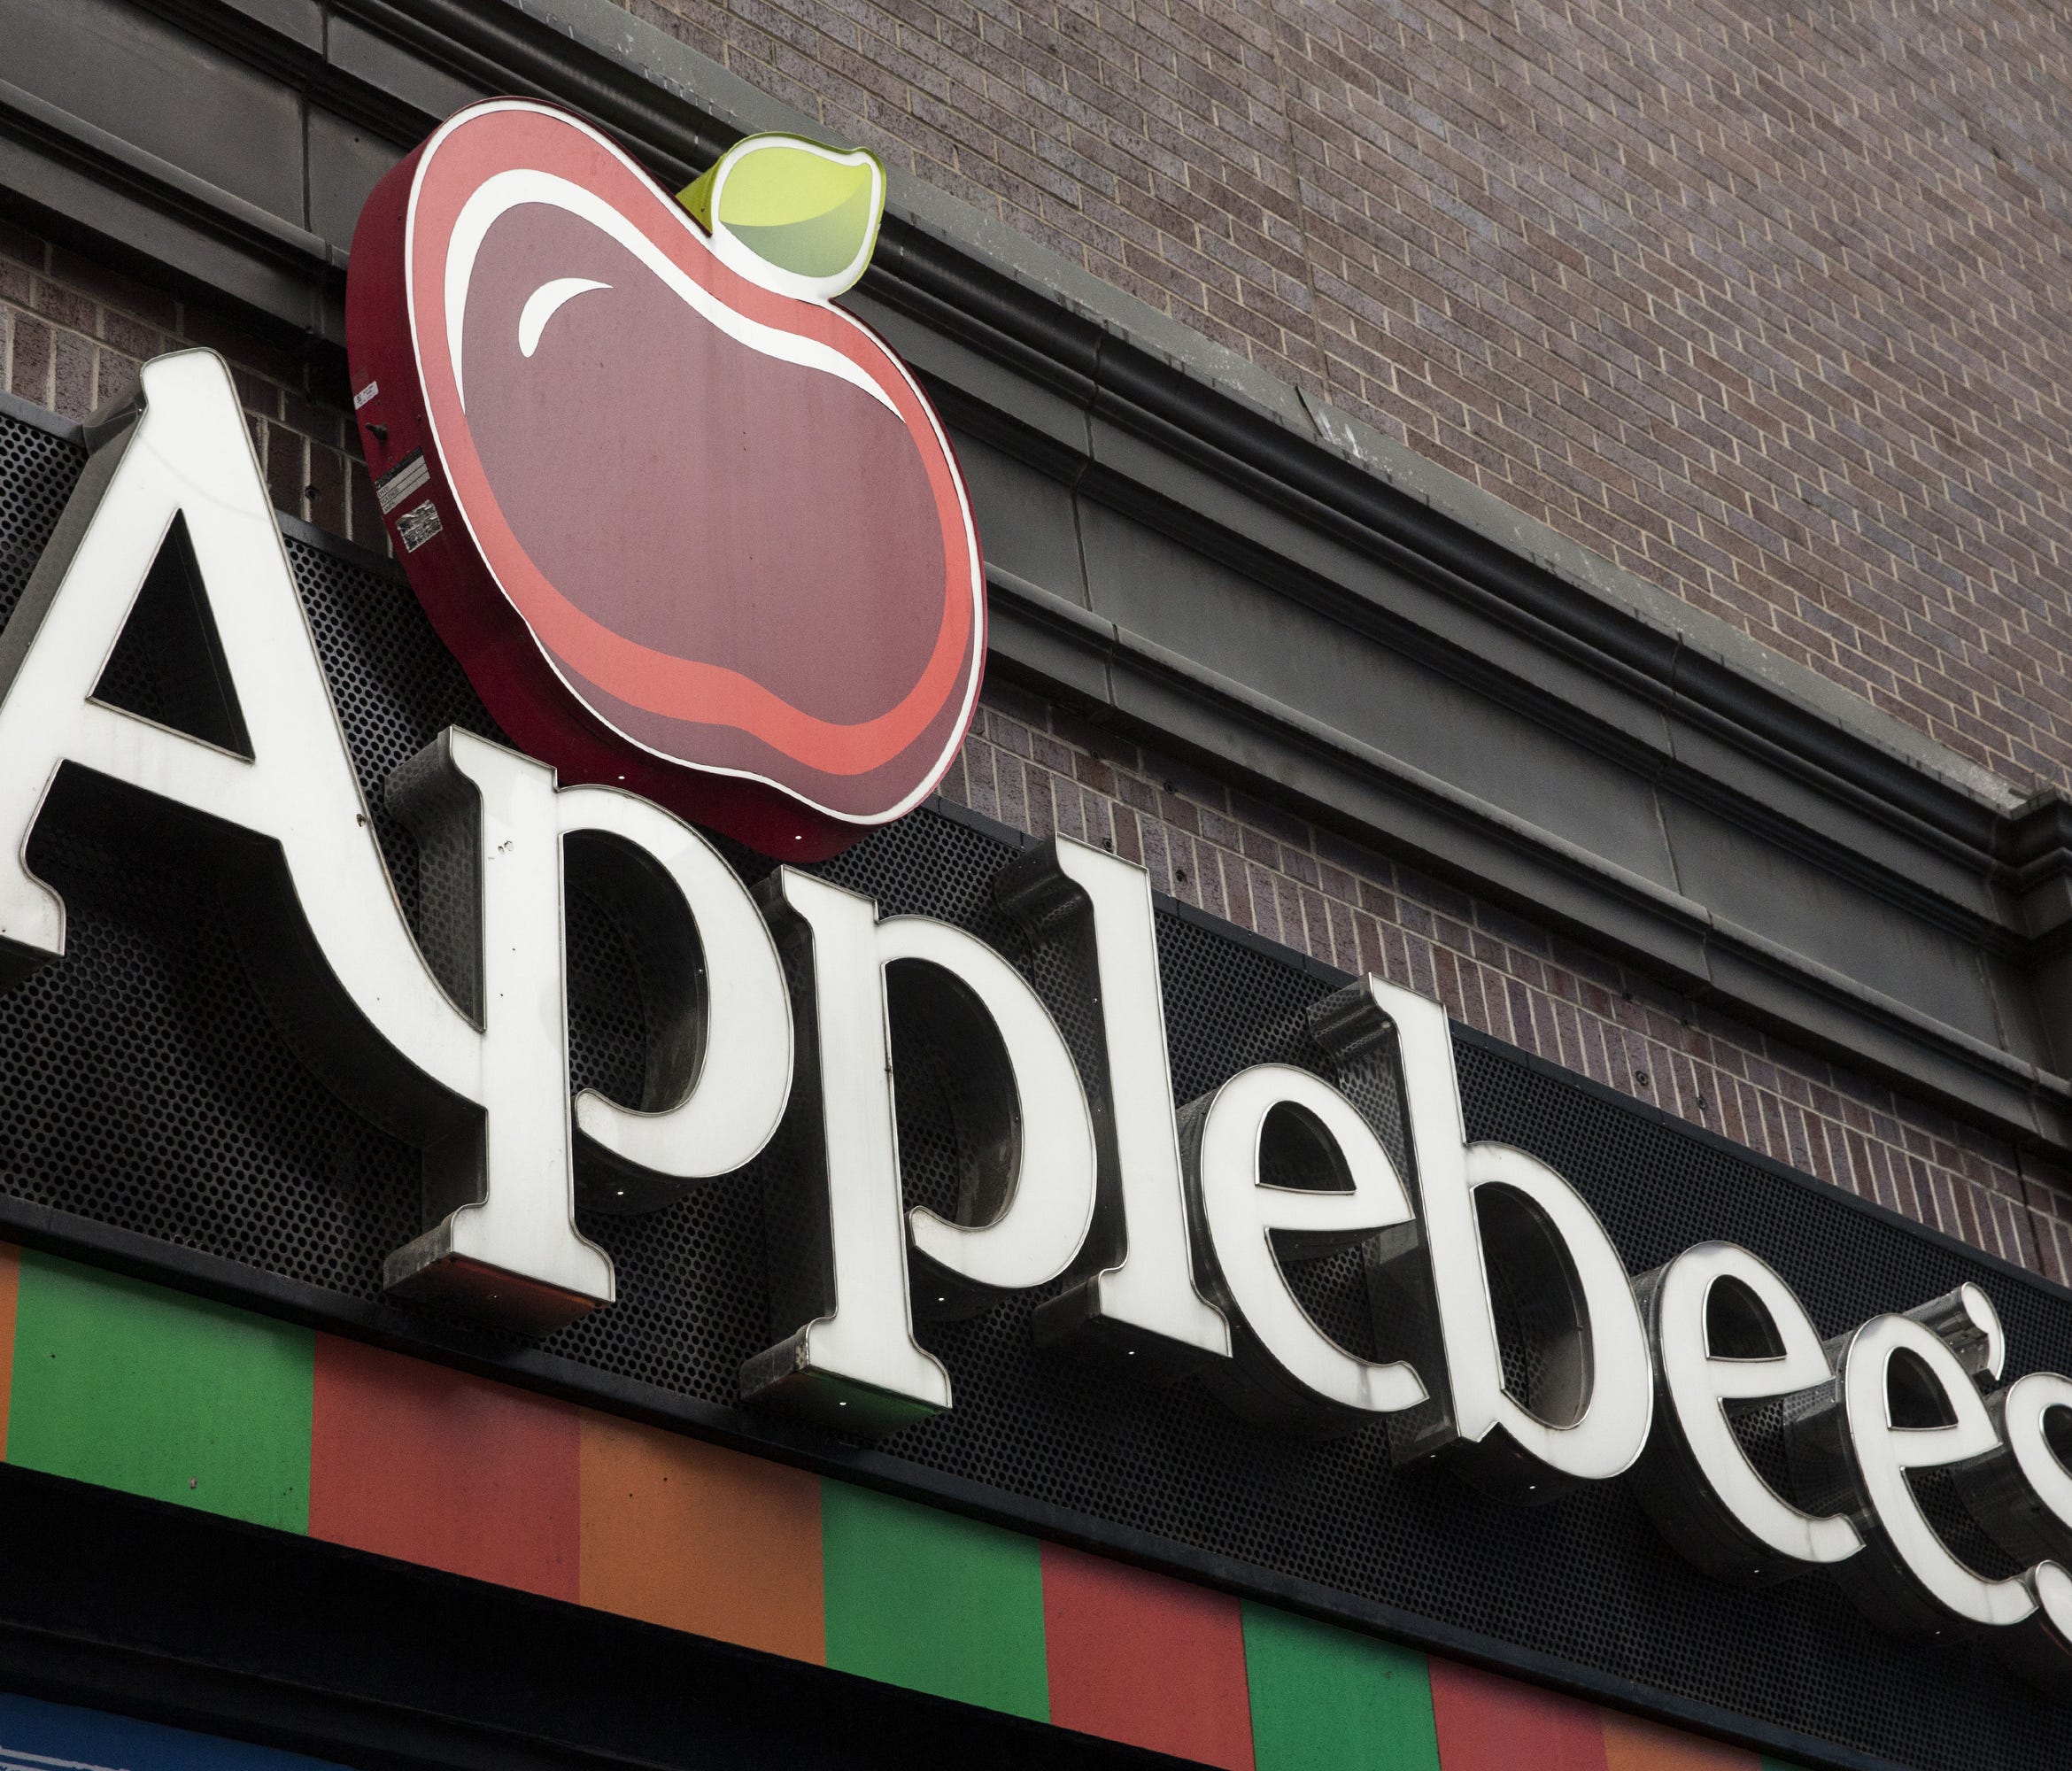 There are plans to shutter up to 160 Applebee's and IHOP locations, according to parent DineEquity.